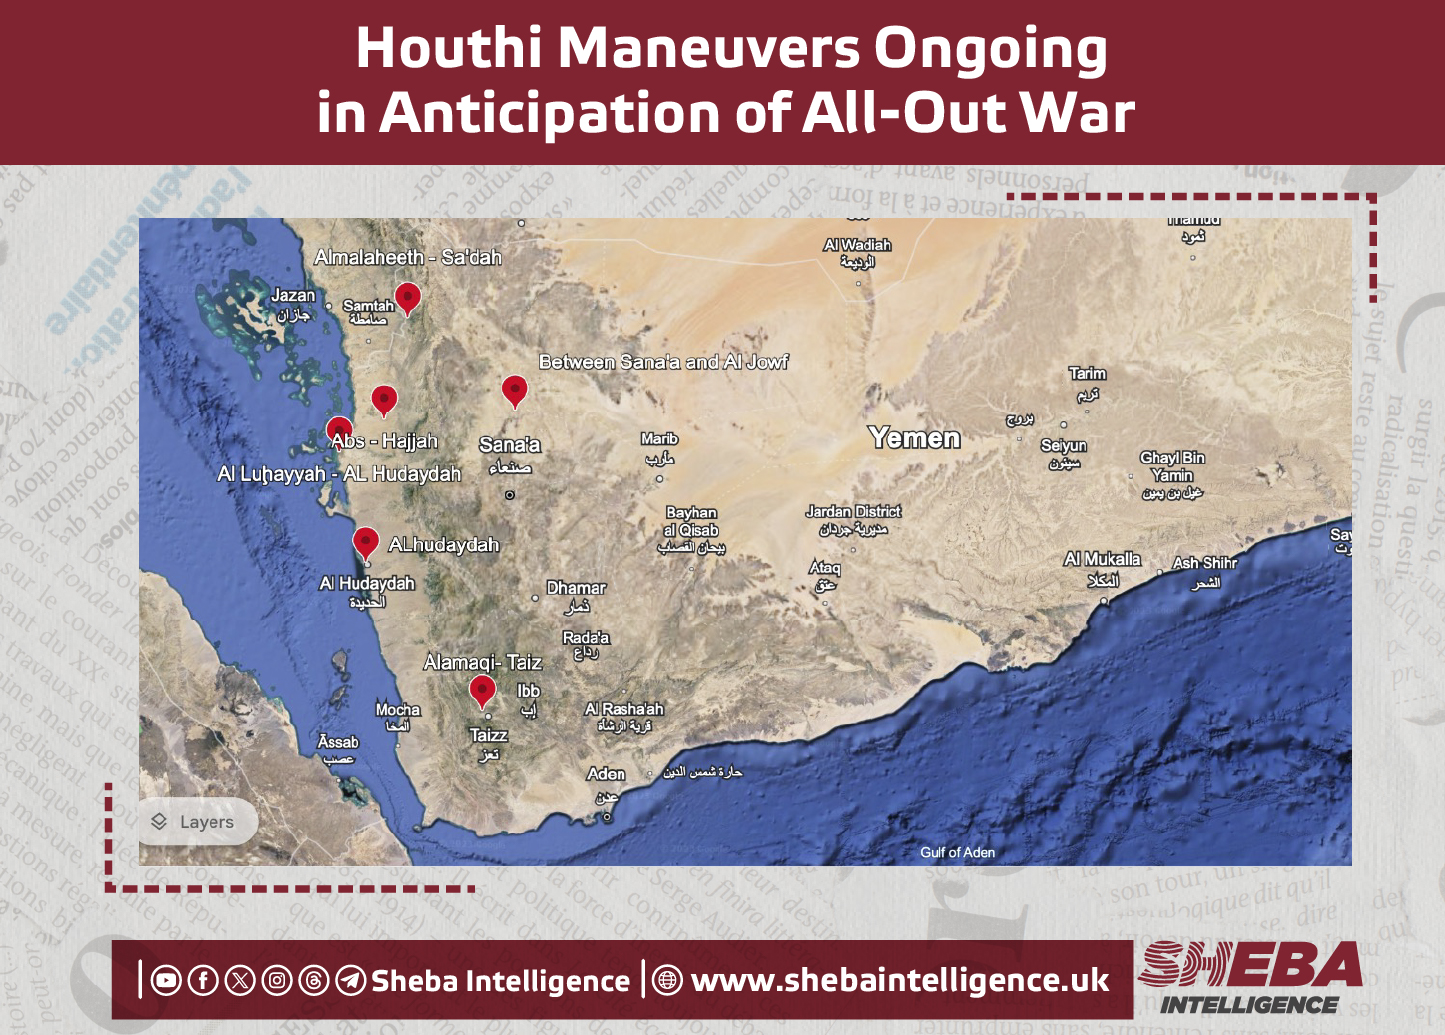 Houthi Maneuvers Ongoing in Anticipation of All-Out War